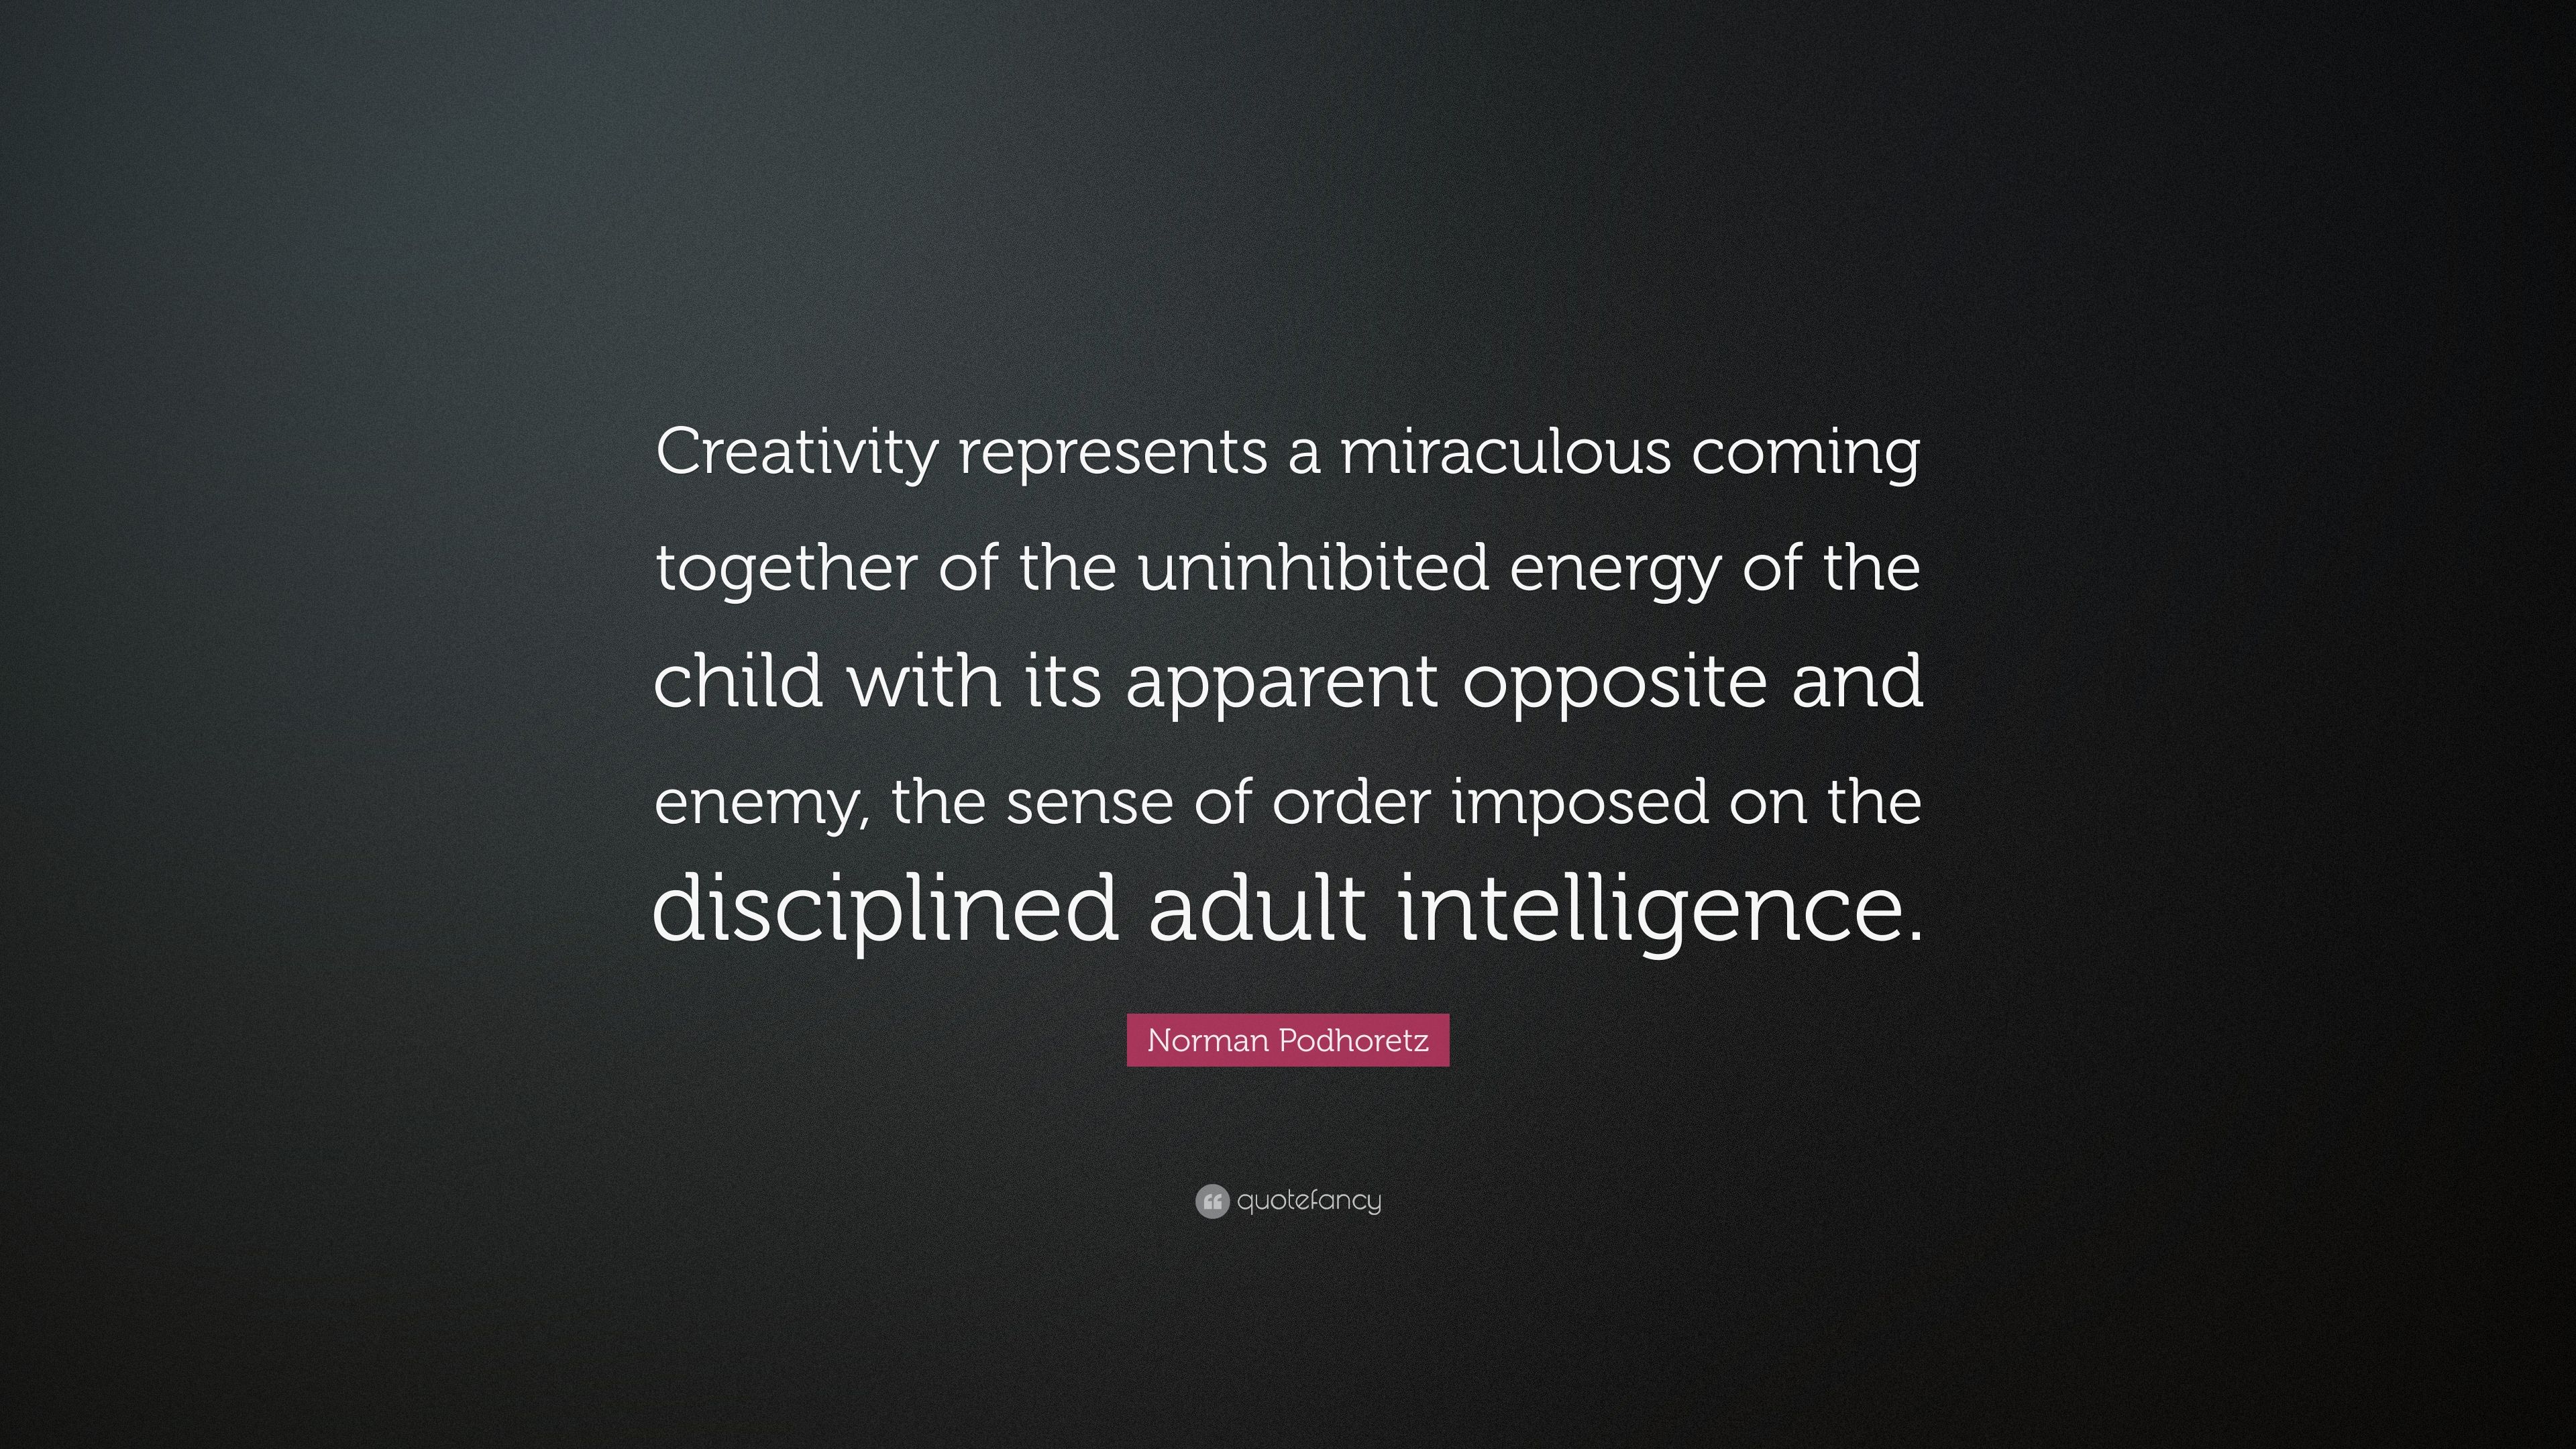 Norman podhoretz quote âcreativity represents a miraculous ing together of the uninhibited energy of the child with its apparent opposite andâ